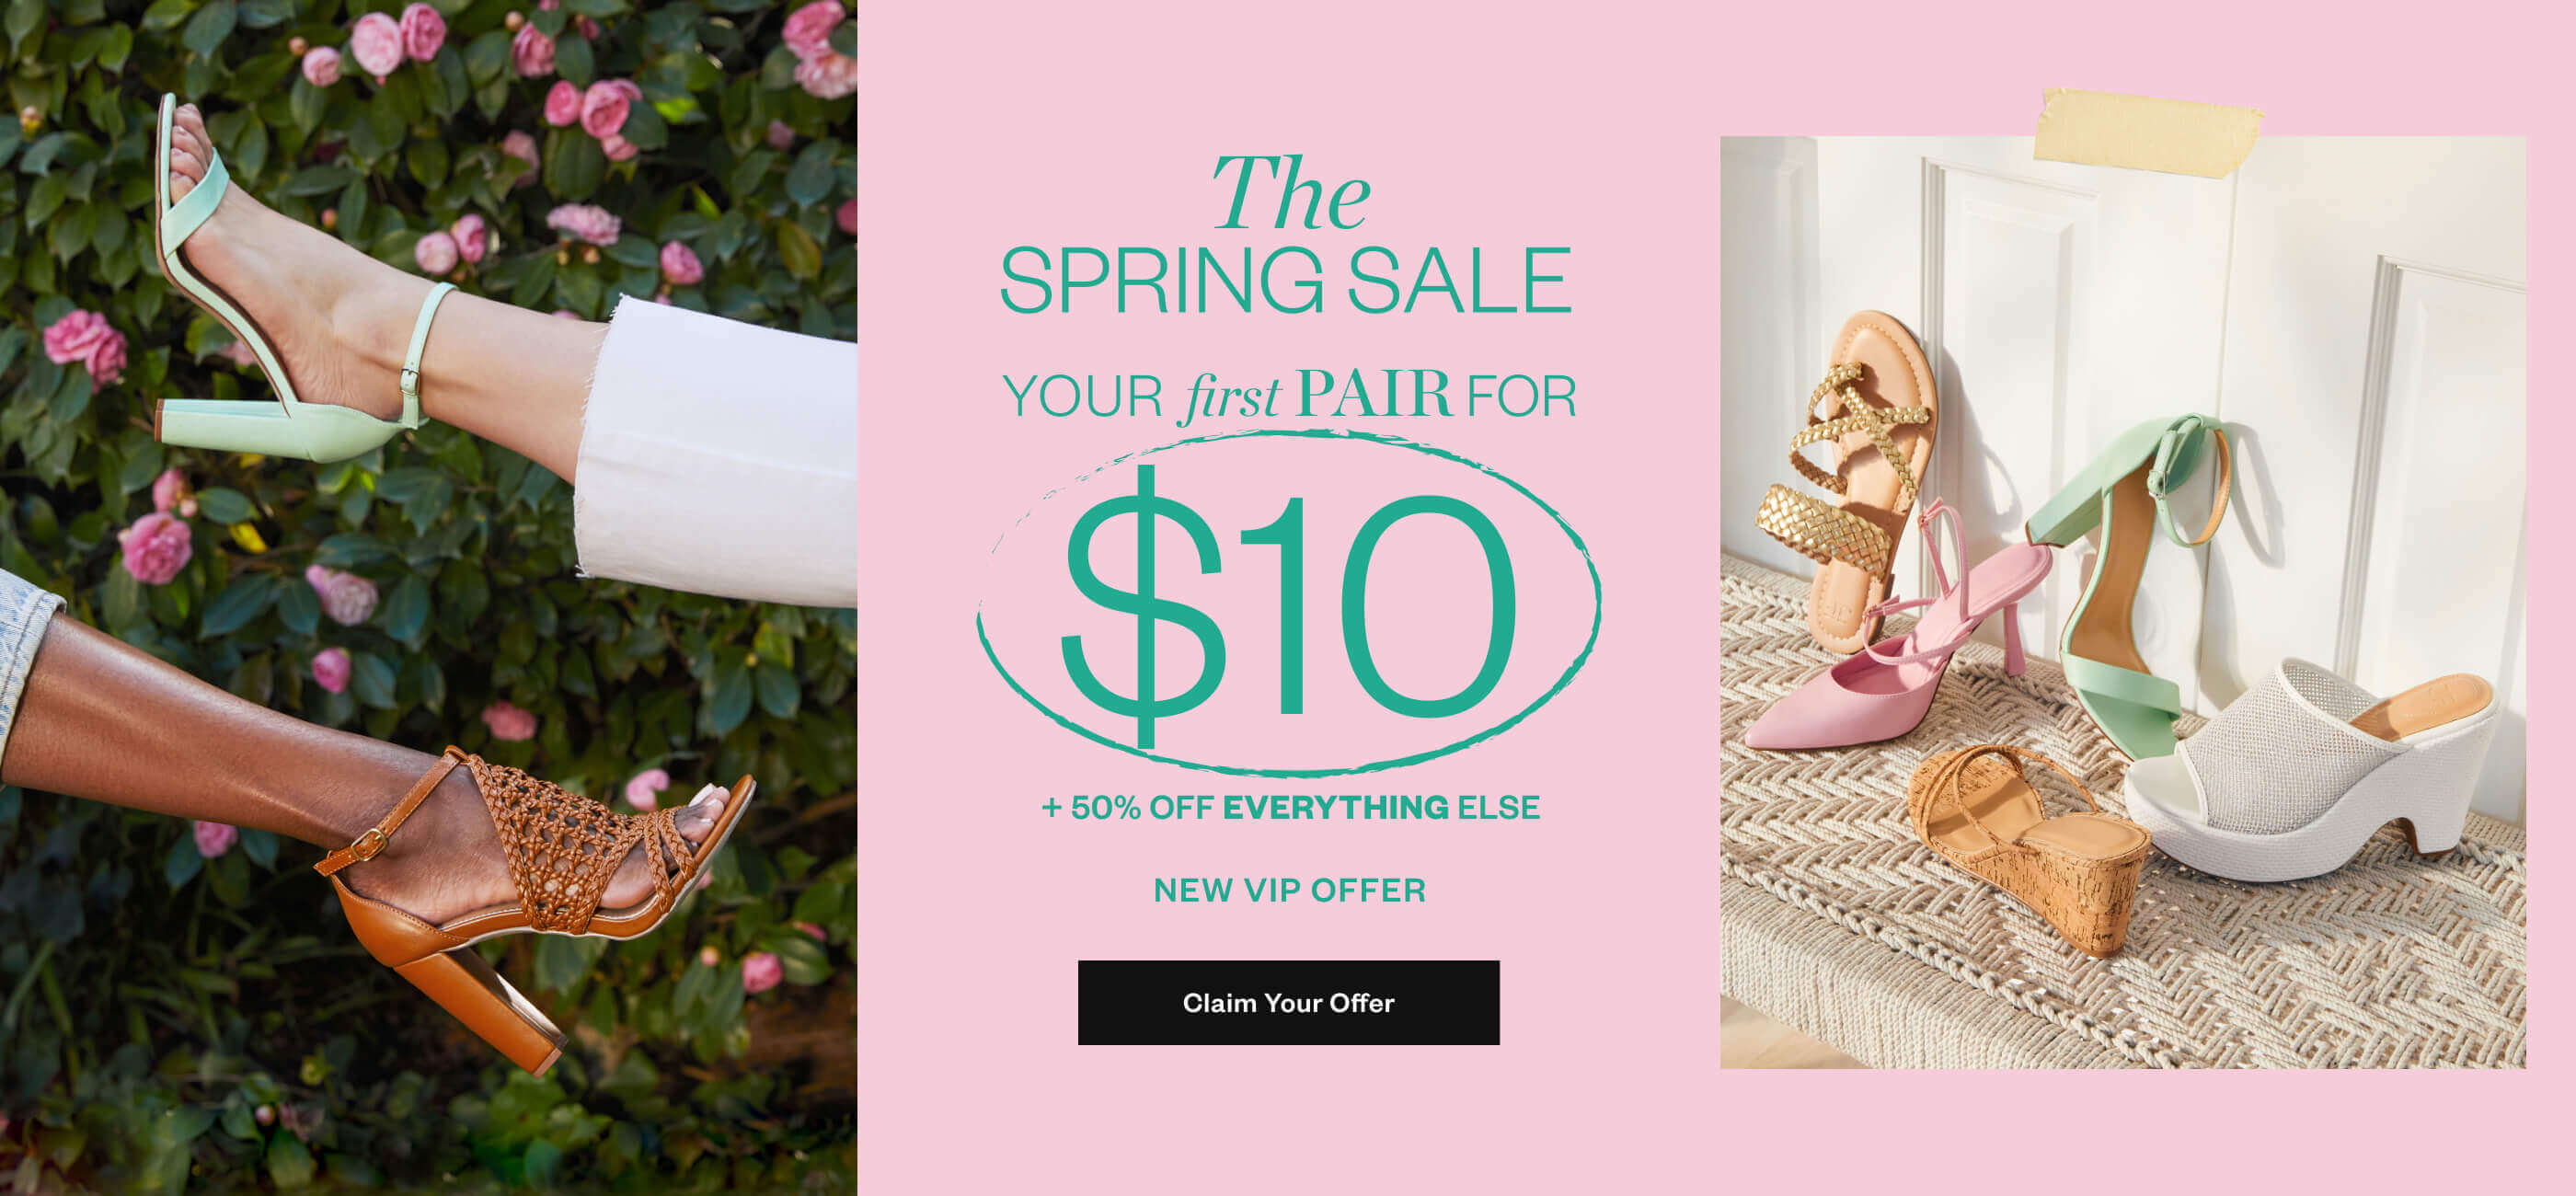 The Spring Sale. Your First Pair For $10. Plus 50% Off Everything Else. New VIP offer